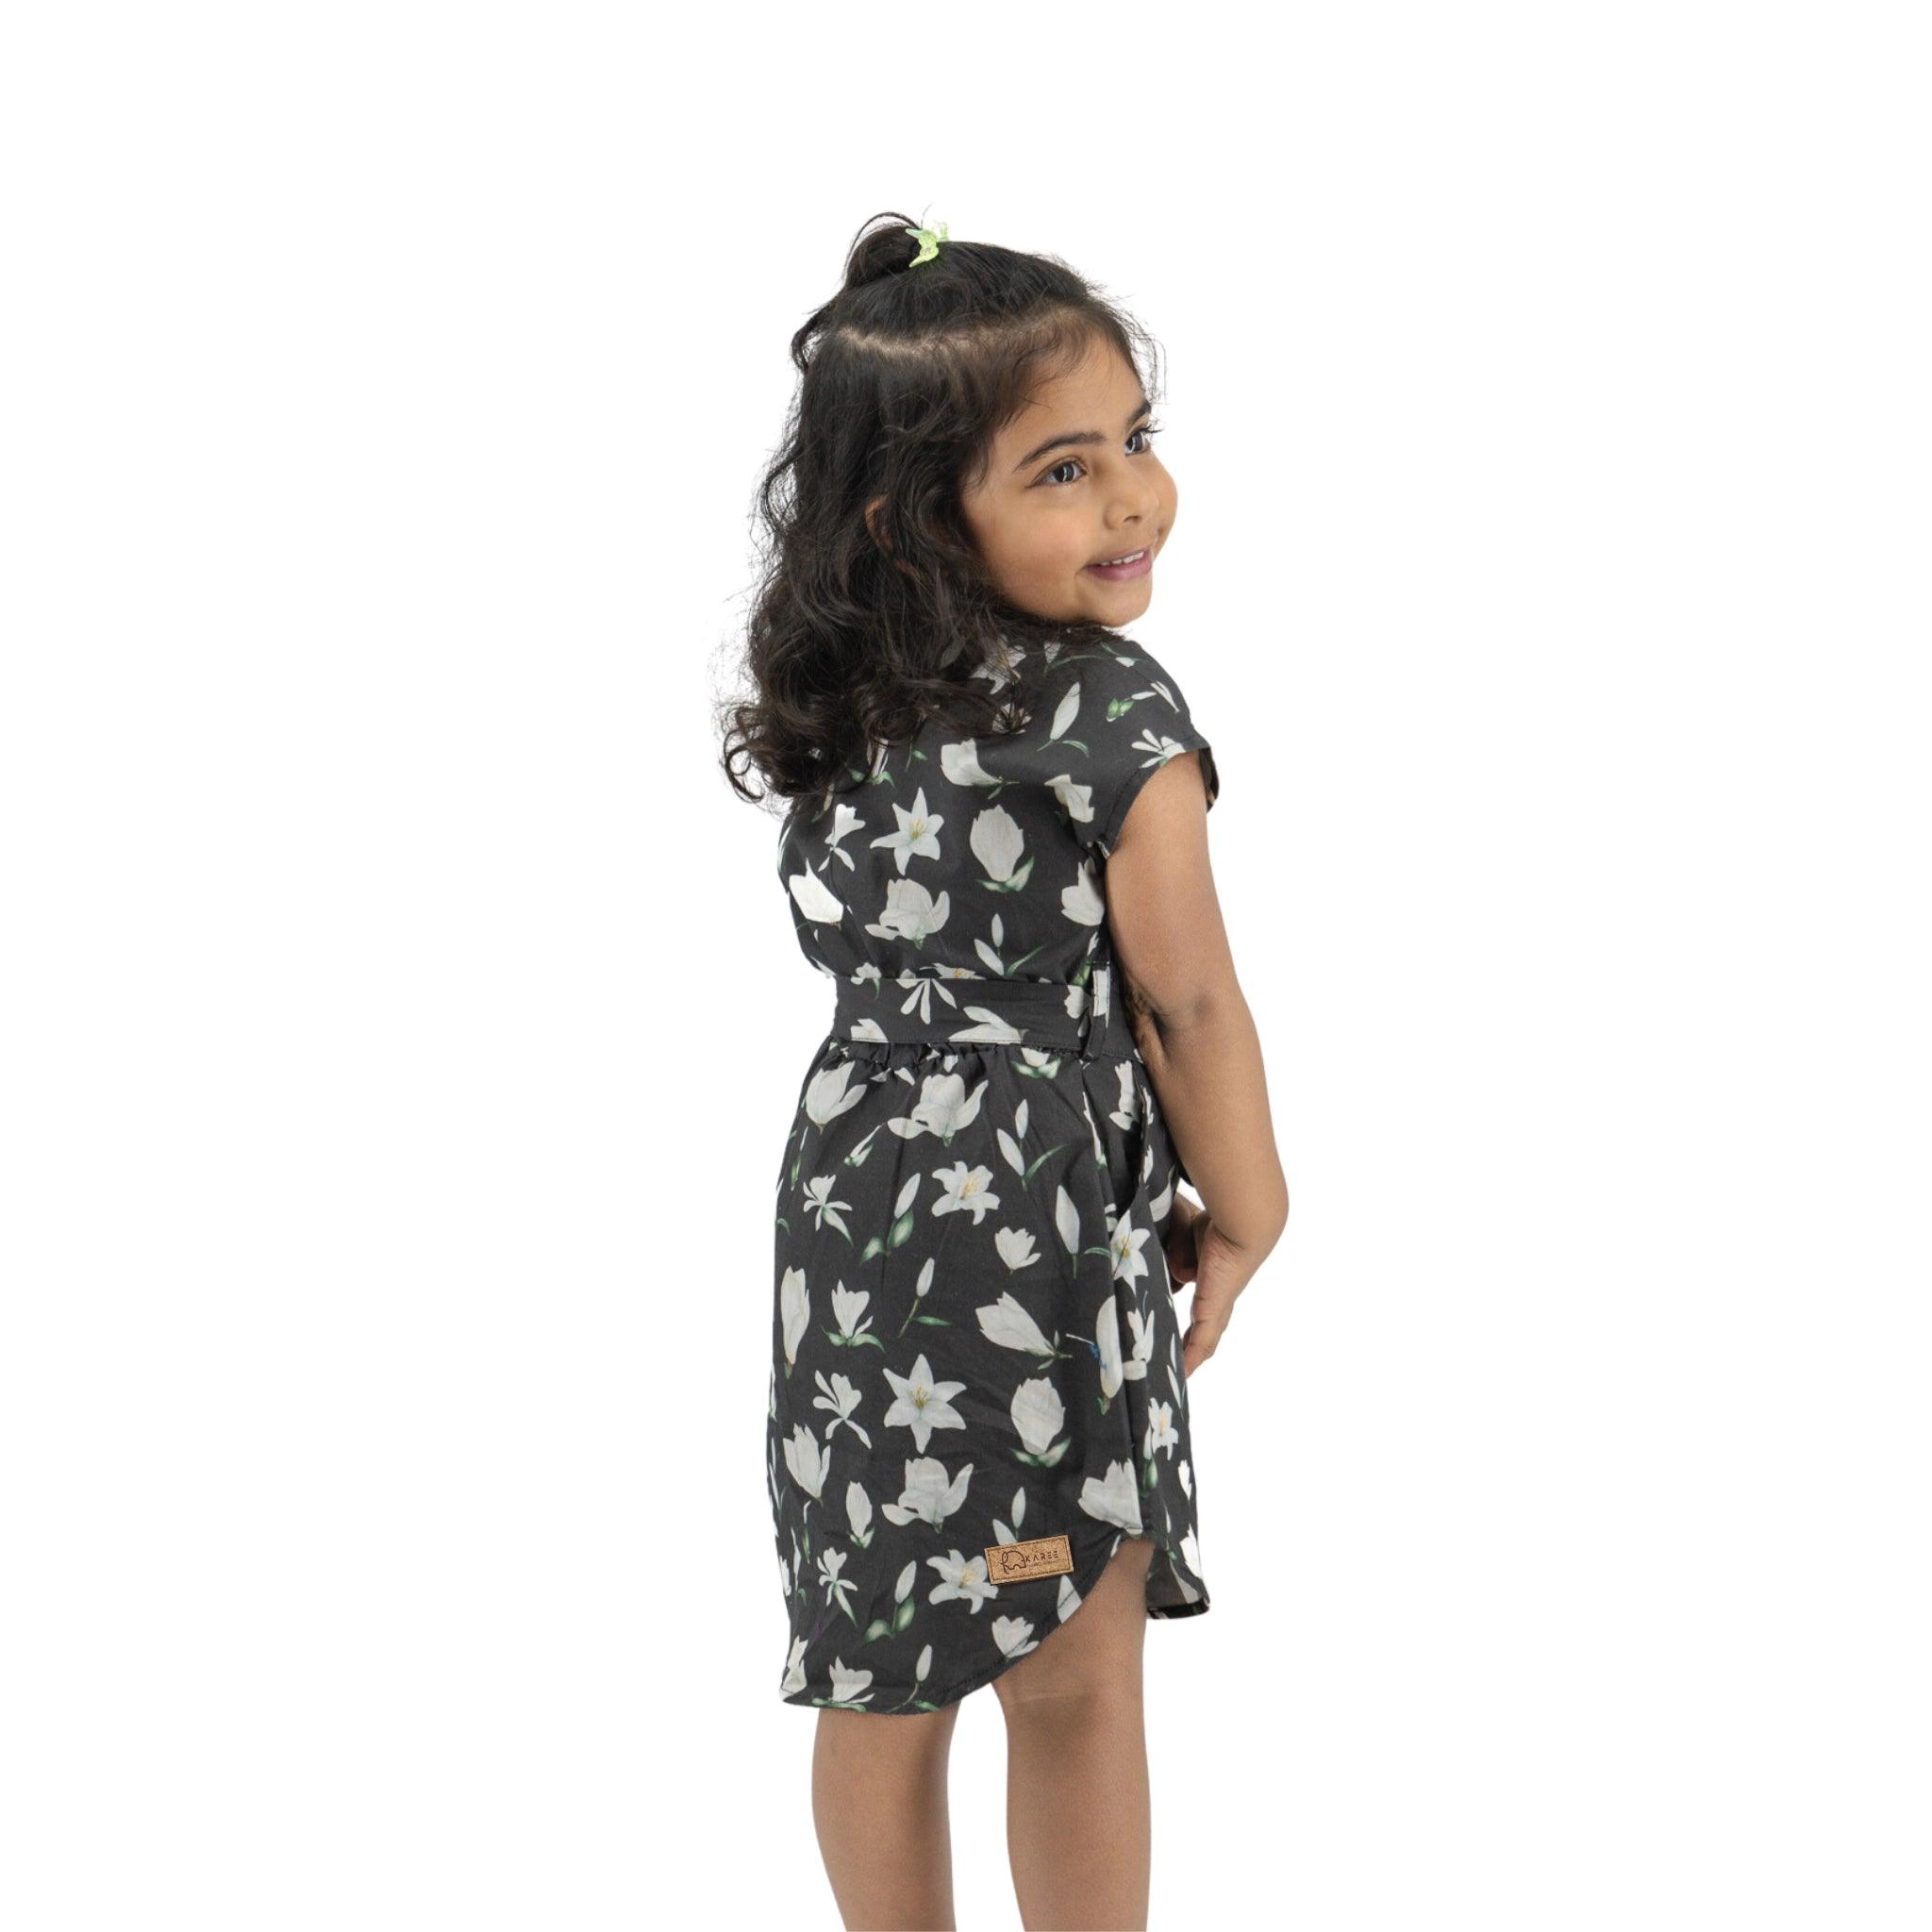 Young girl wearing a Karee Black Lilly Blossom Cotton Shirt Dress with a partial view, looking over her shoulder, isolated on a white background.